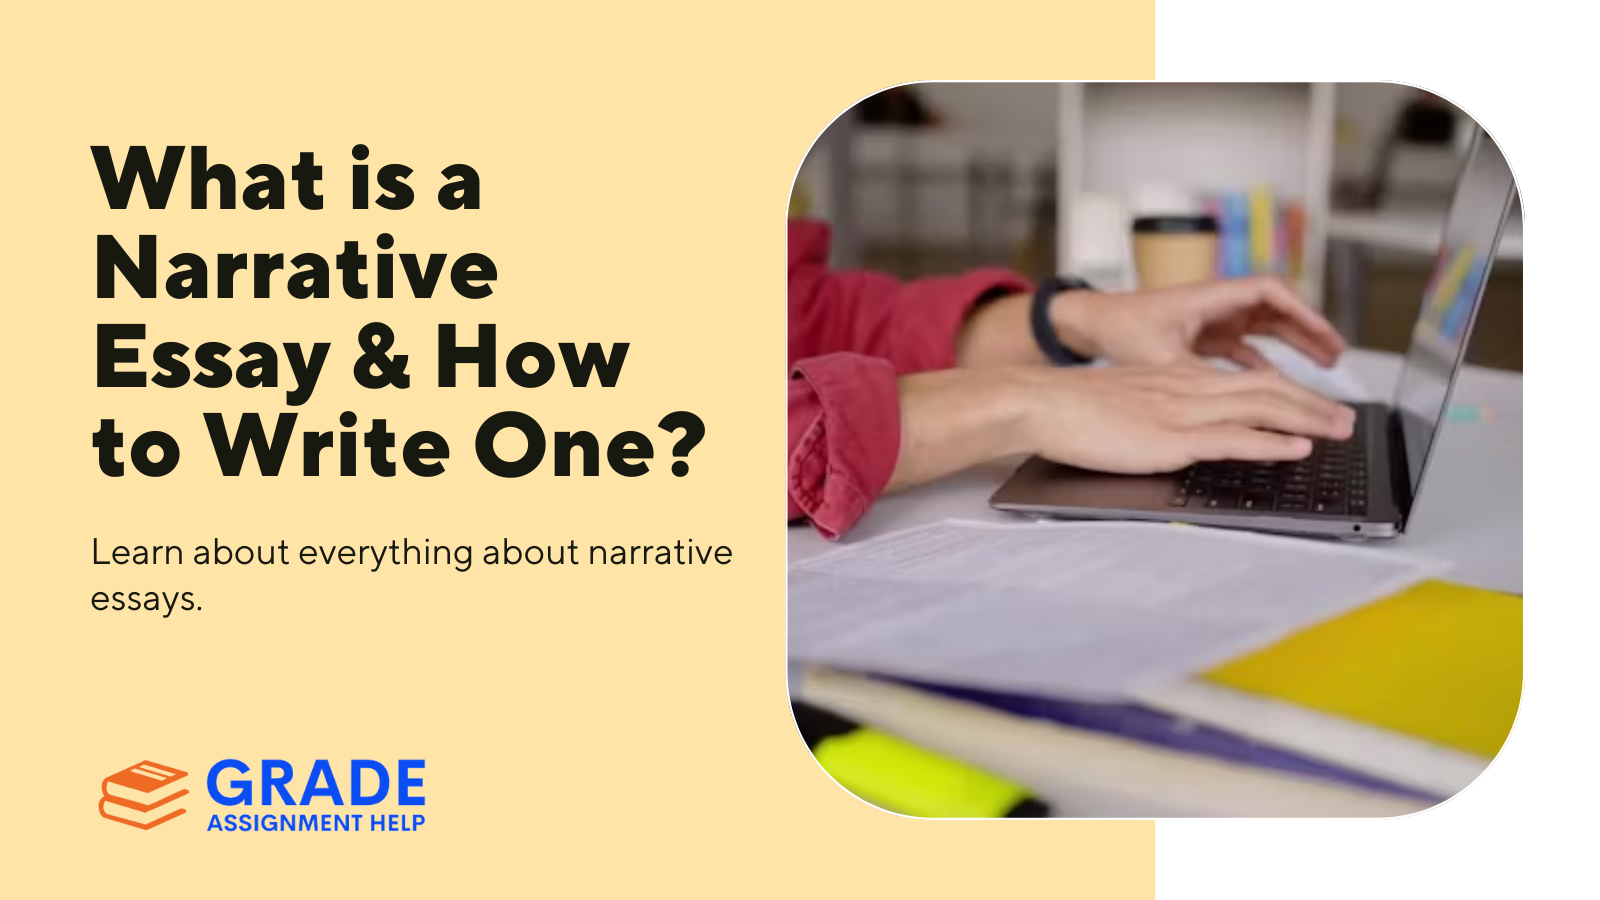 What is a narrative essay